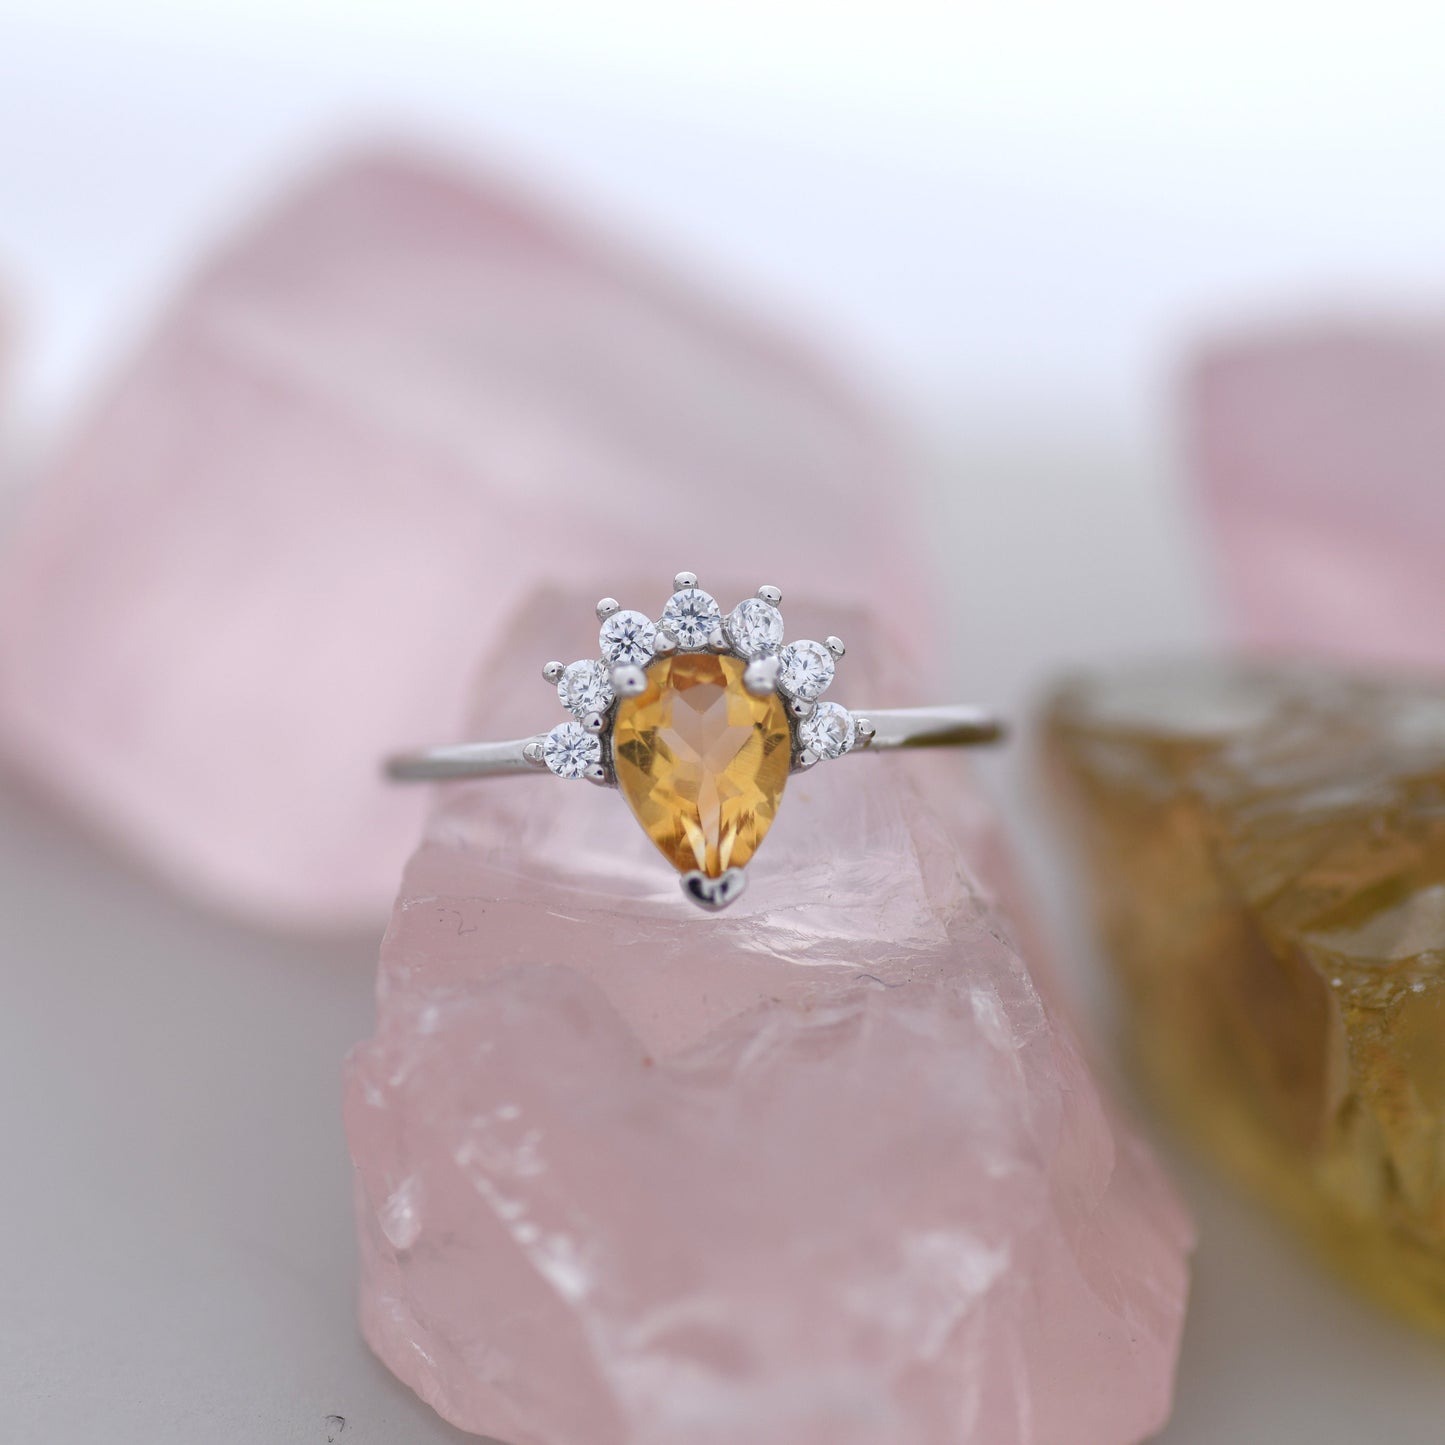 Genuine Pear Cut Citrine Crown Ring in Sterling Silver, Natural Yellow Citrine Crystal Ring, Vintage Inspired Design, US 5 - 8